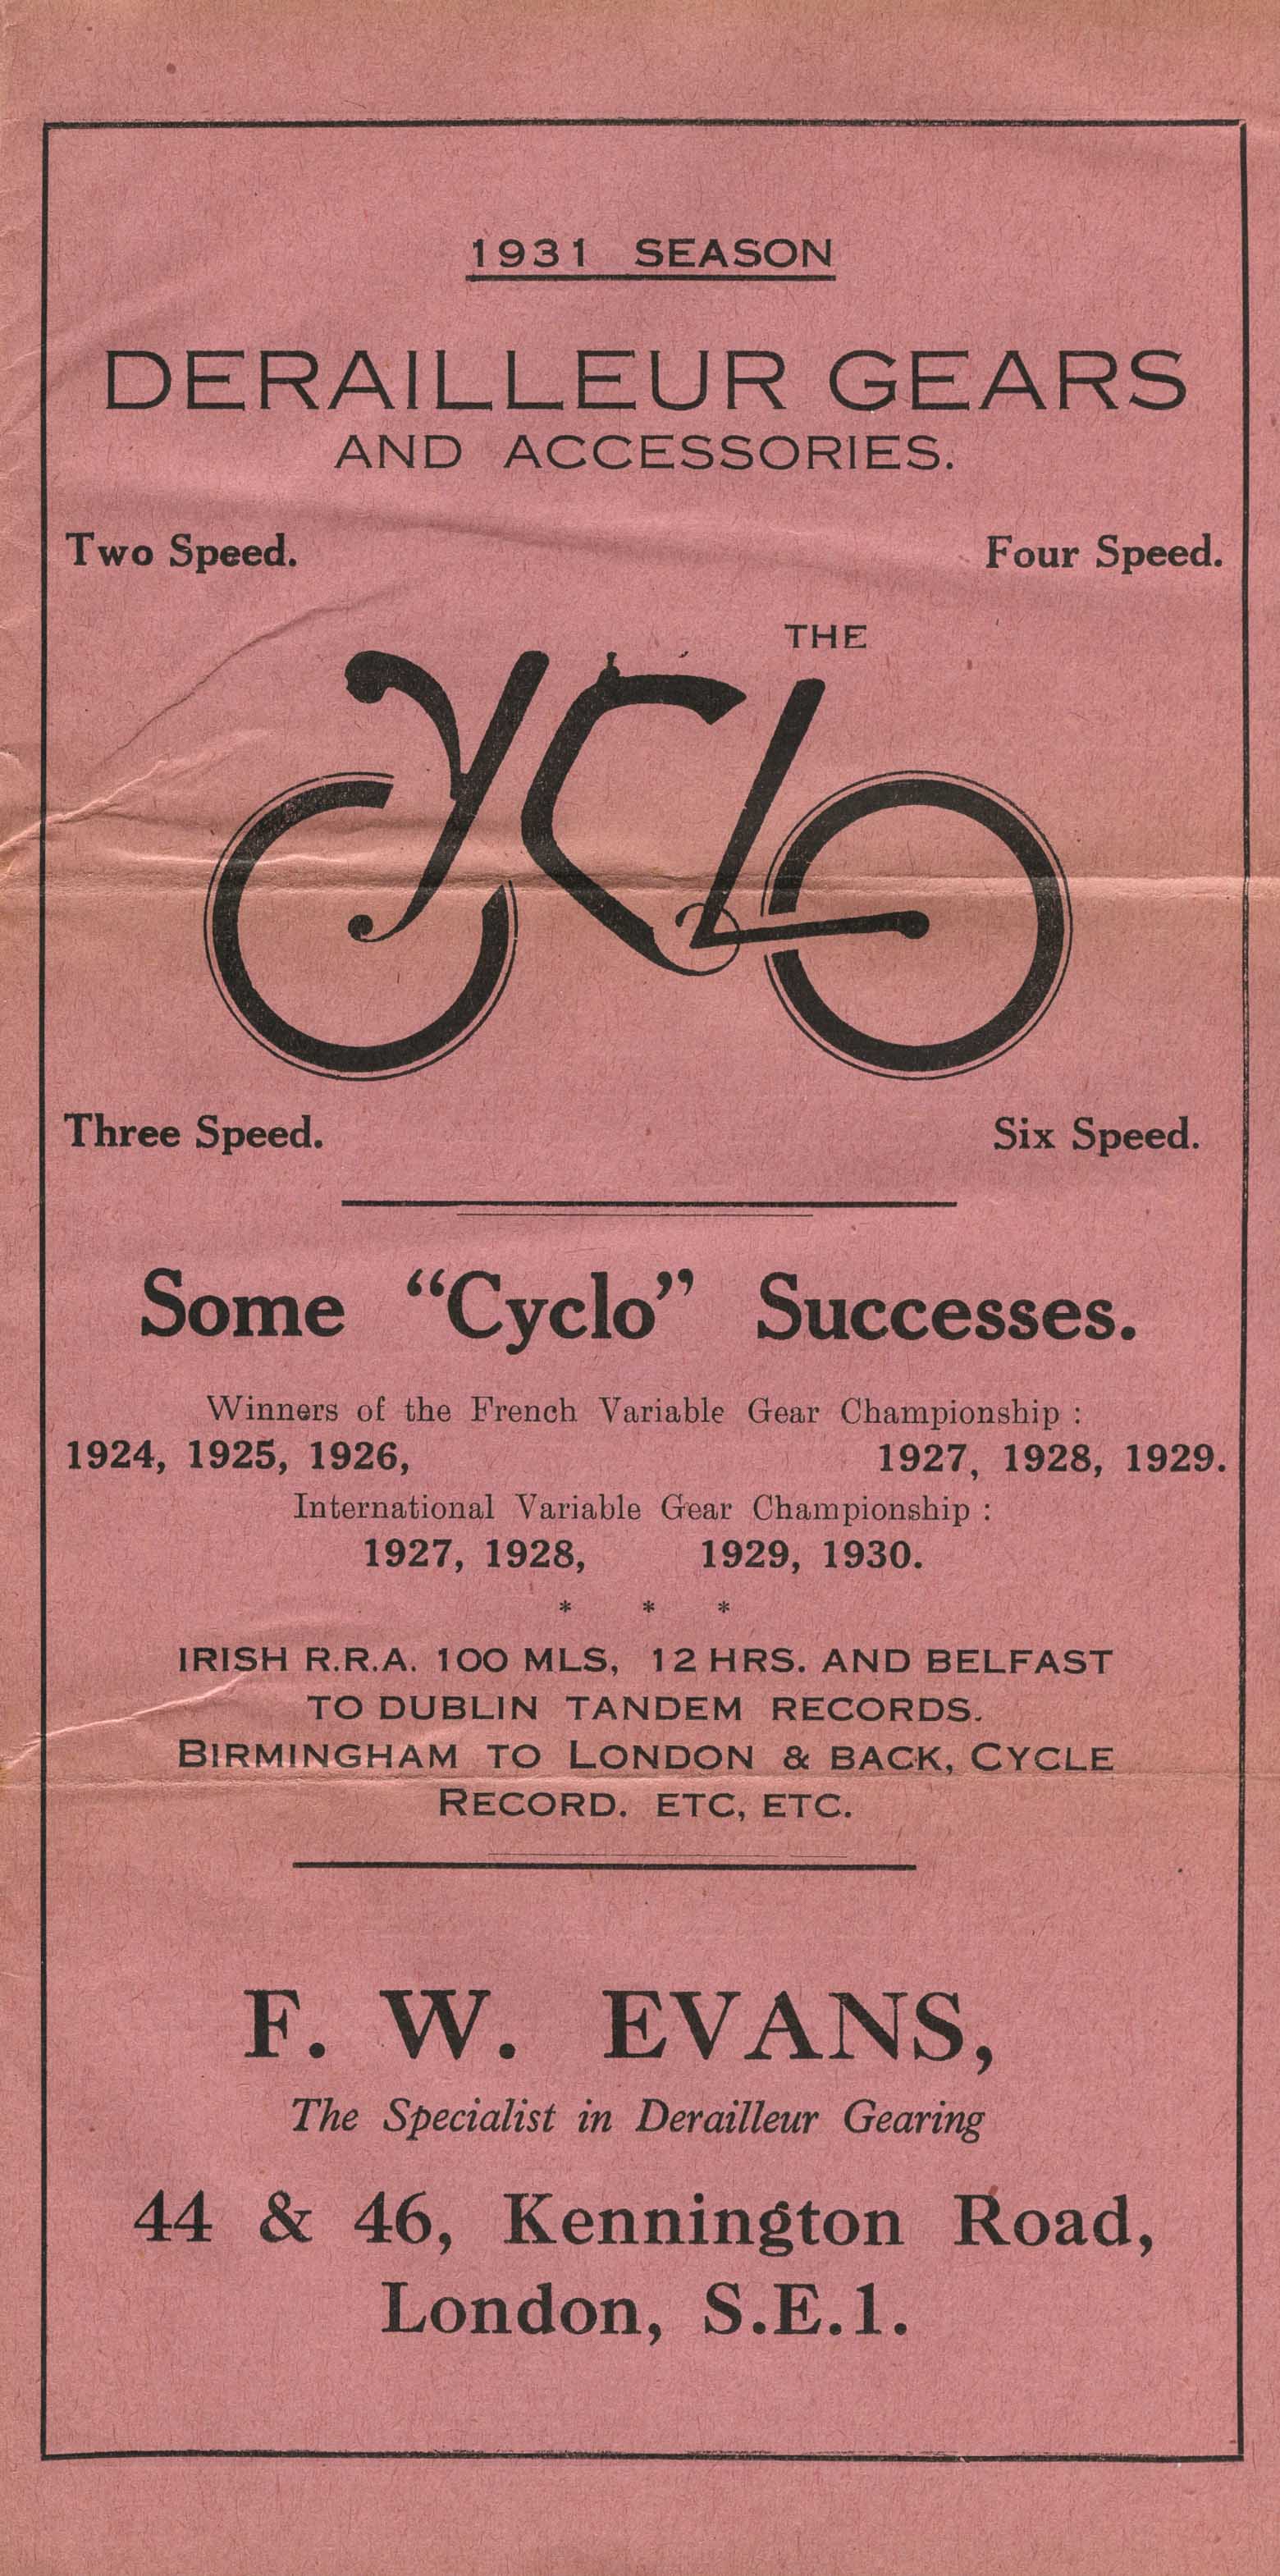 The Cyclo - Derailleur Gears and Accessories 1931 season scan 01 main image